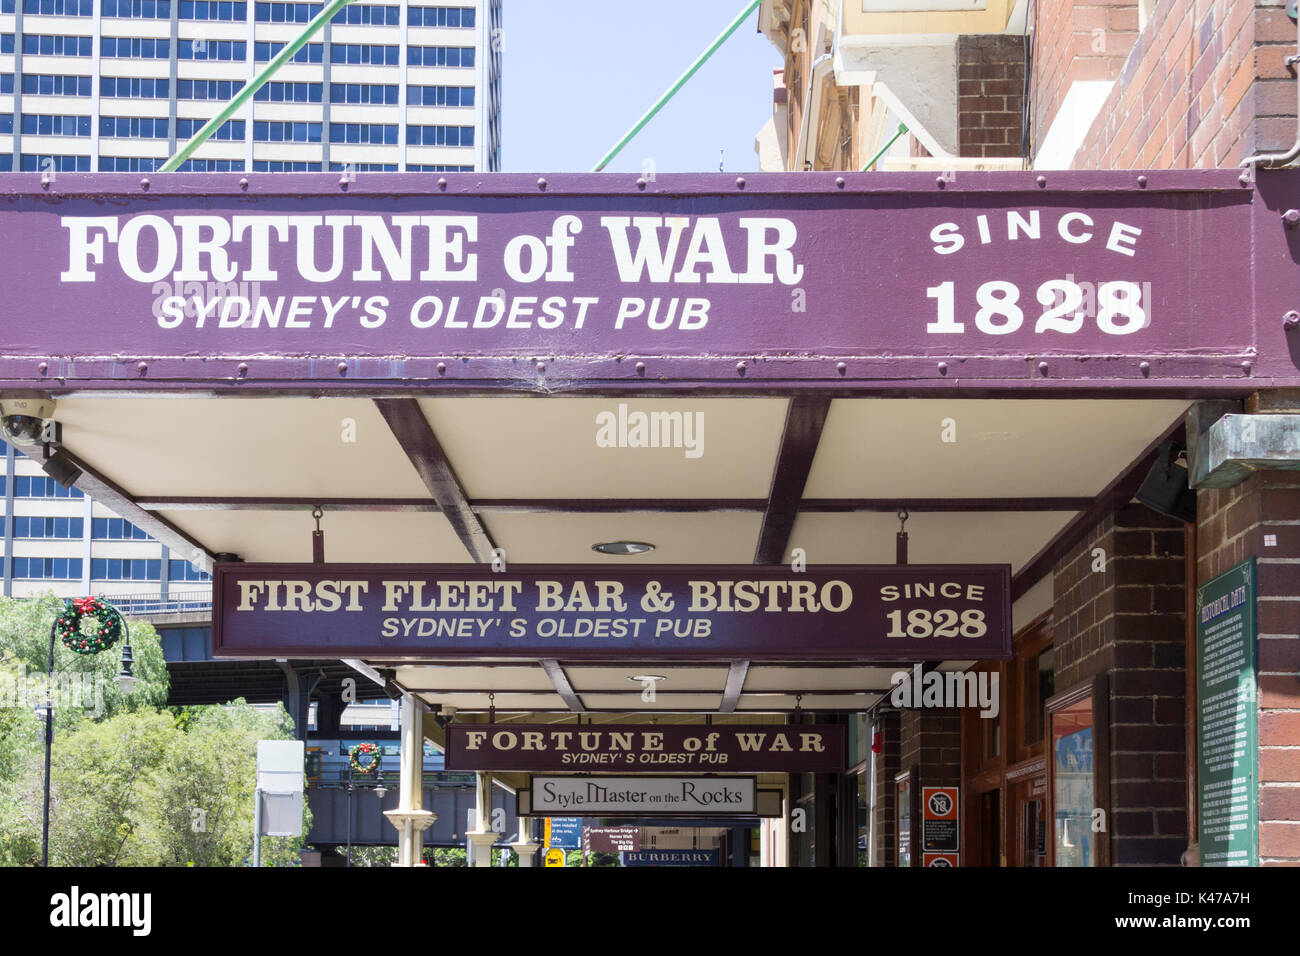 Signs for the Fortune of War, reputedly Sydneys oldest pub, Sydney, NSW, New South Wales, Australia Stock Photo